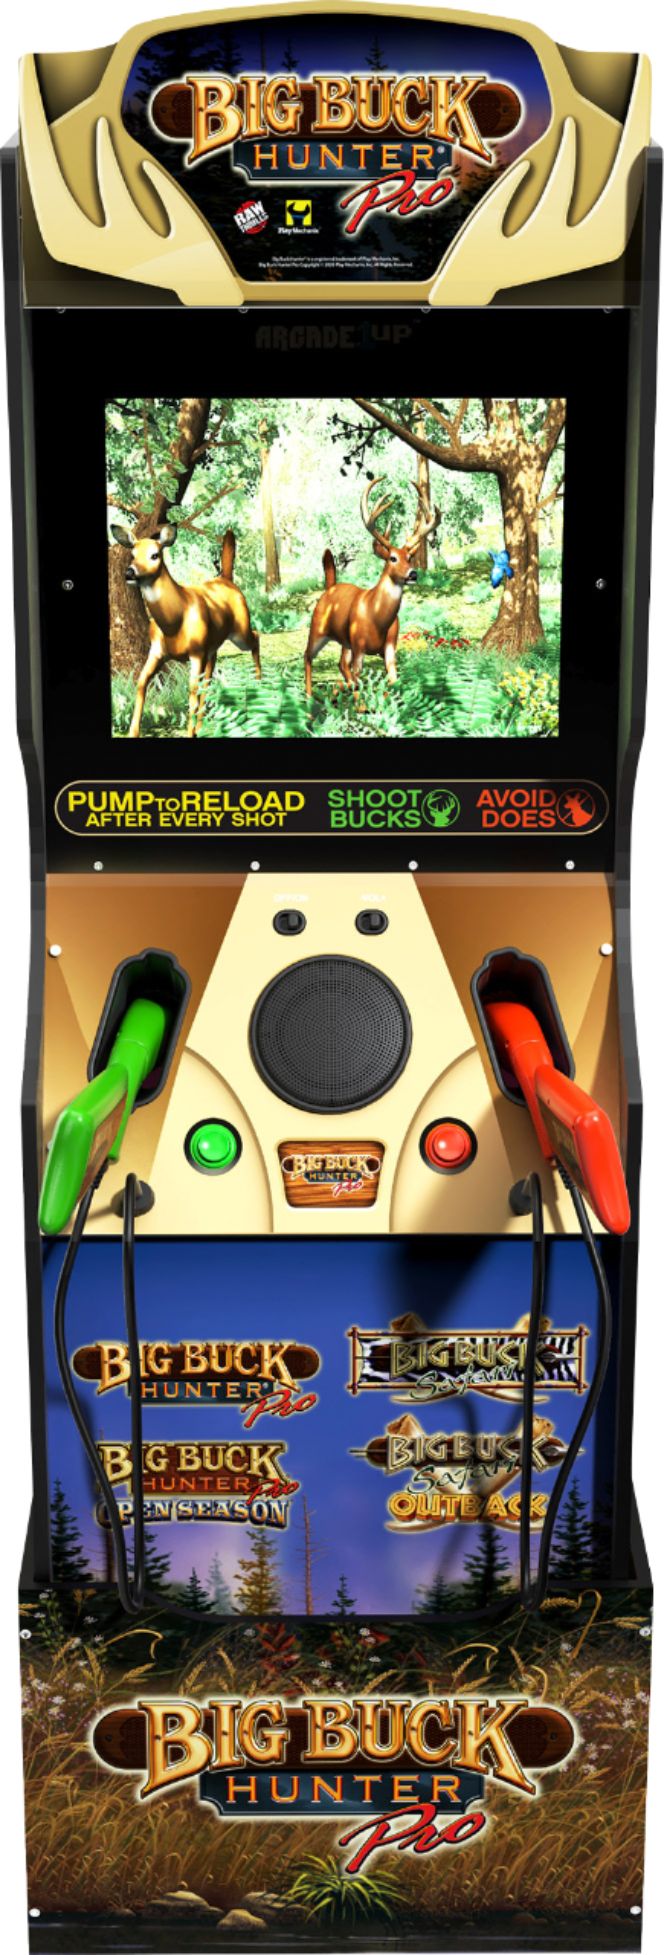 Arcade1Up - Big Buck Hunter Pro Arcade with Riser and Wall Sign - Multi